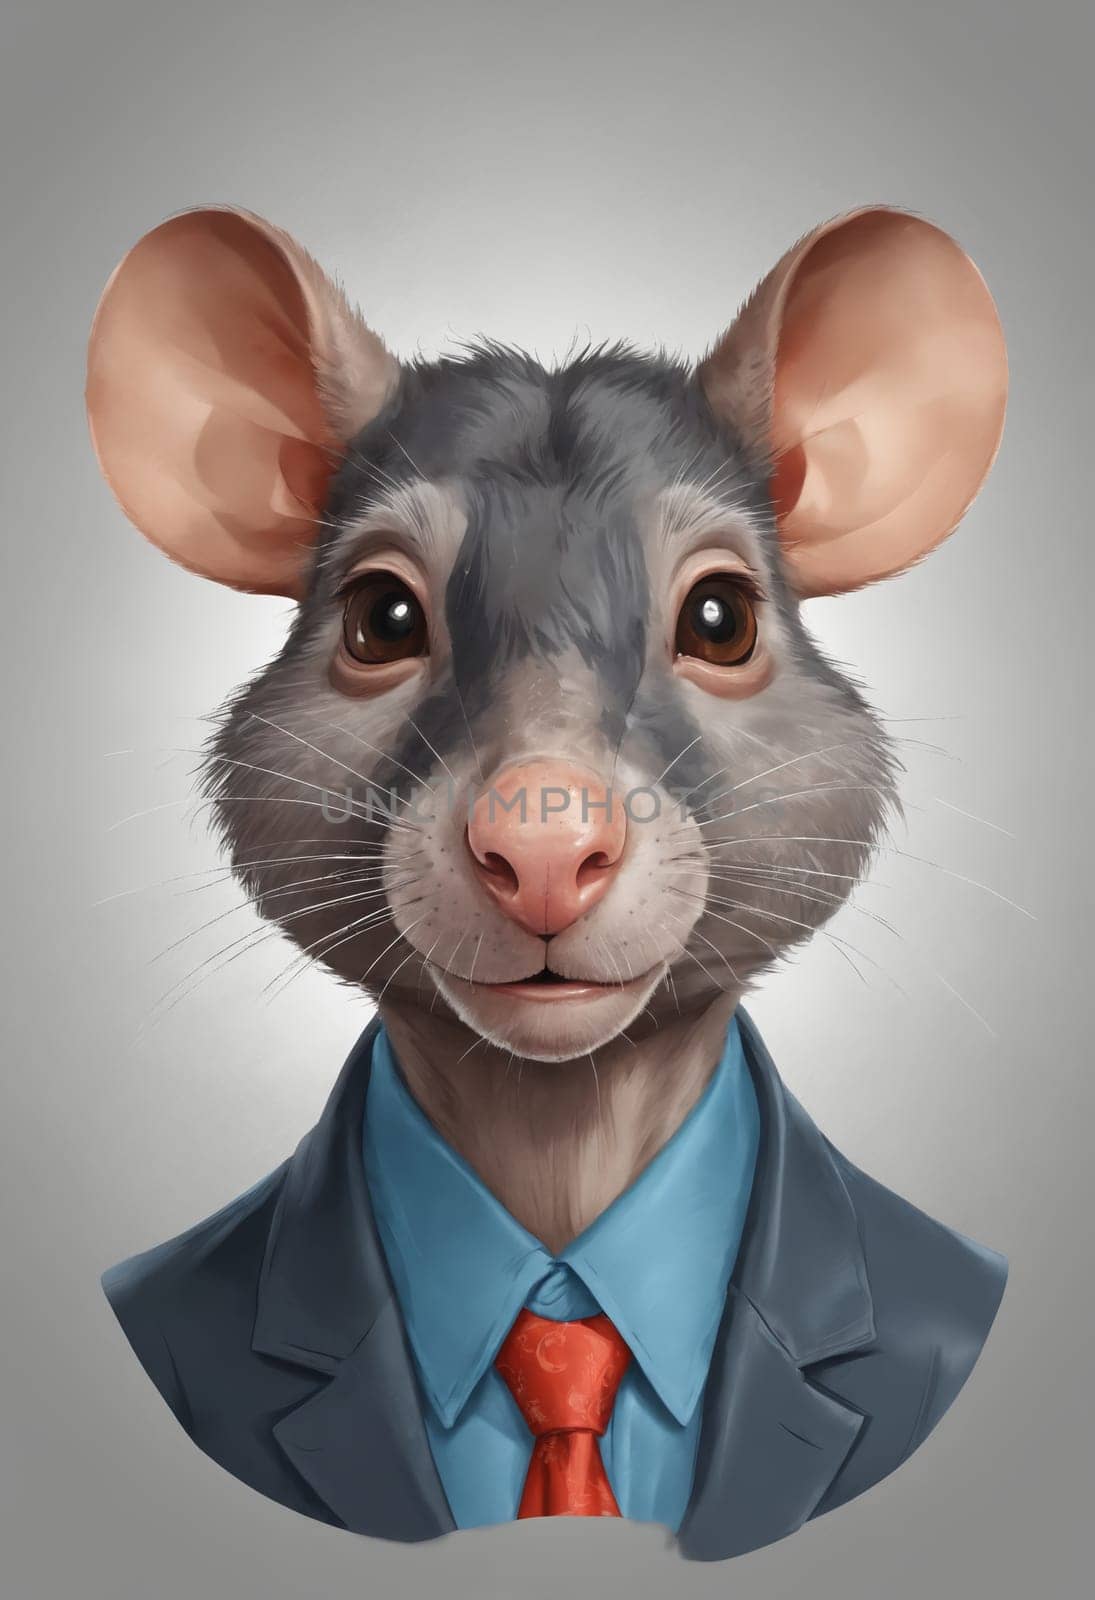 A rat in a suit embodies professionalism with a quirky twist in this portrait.